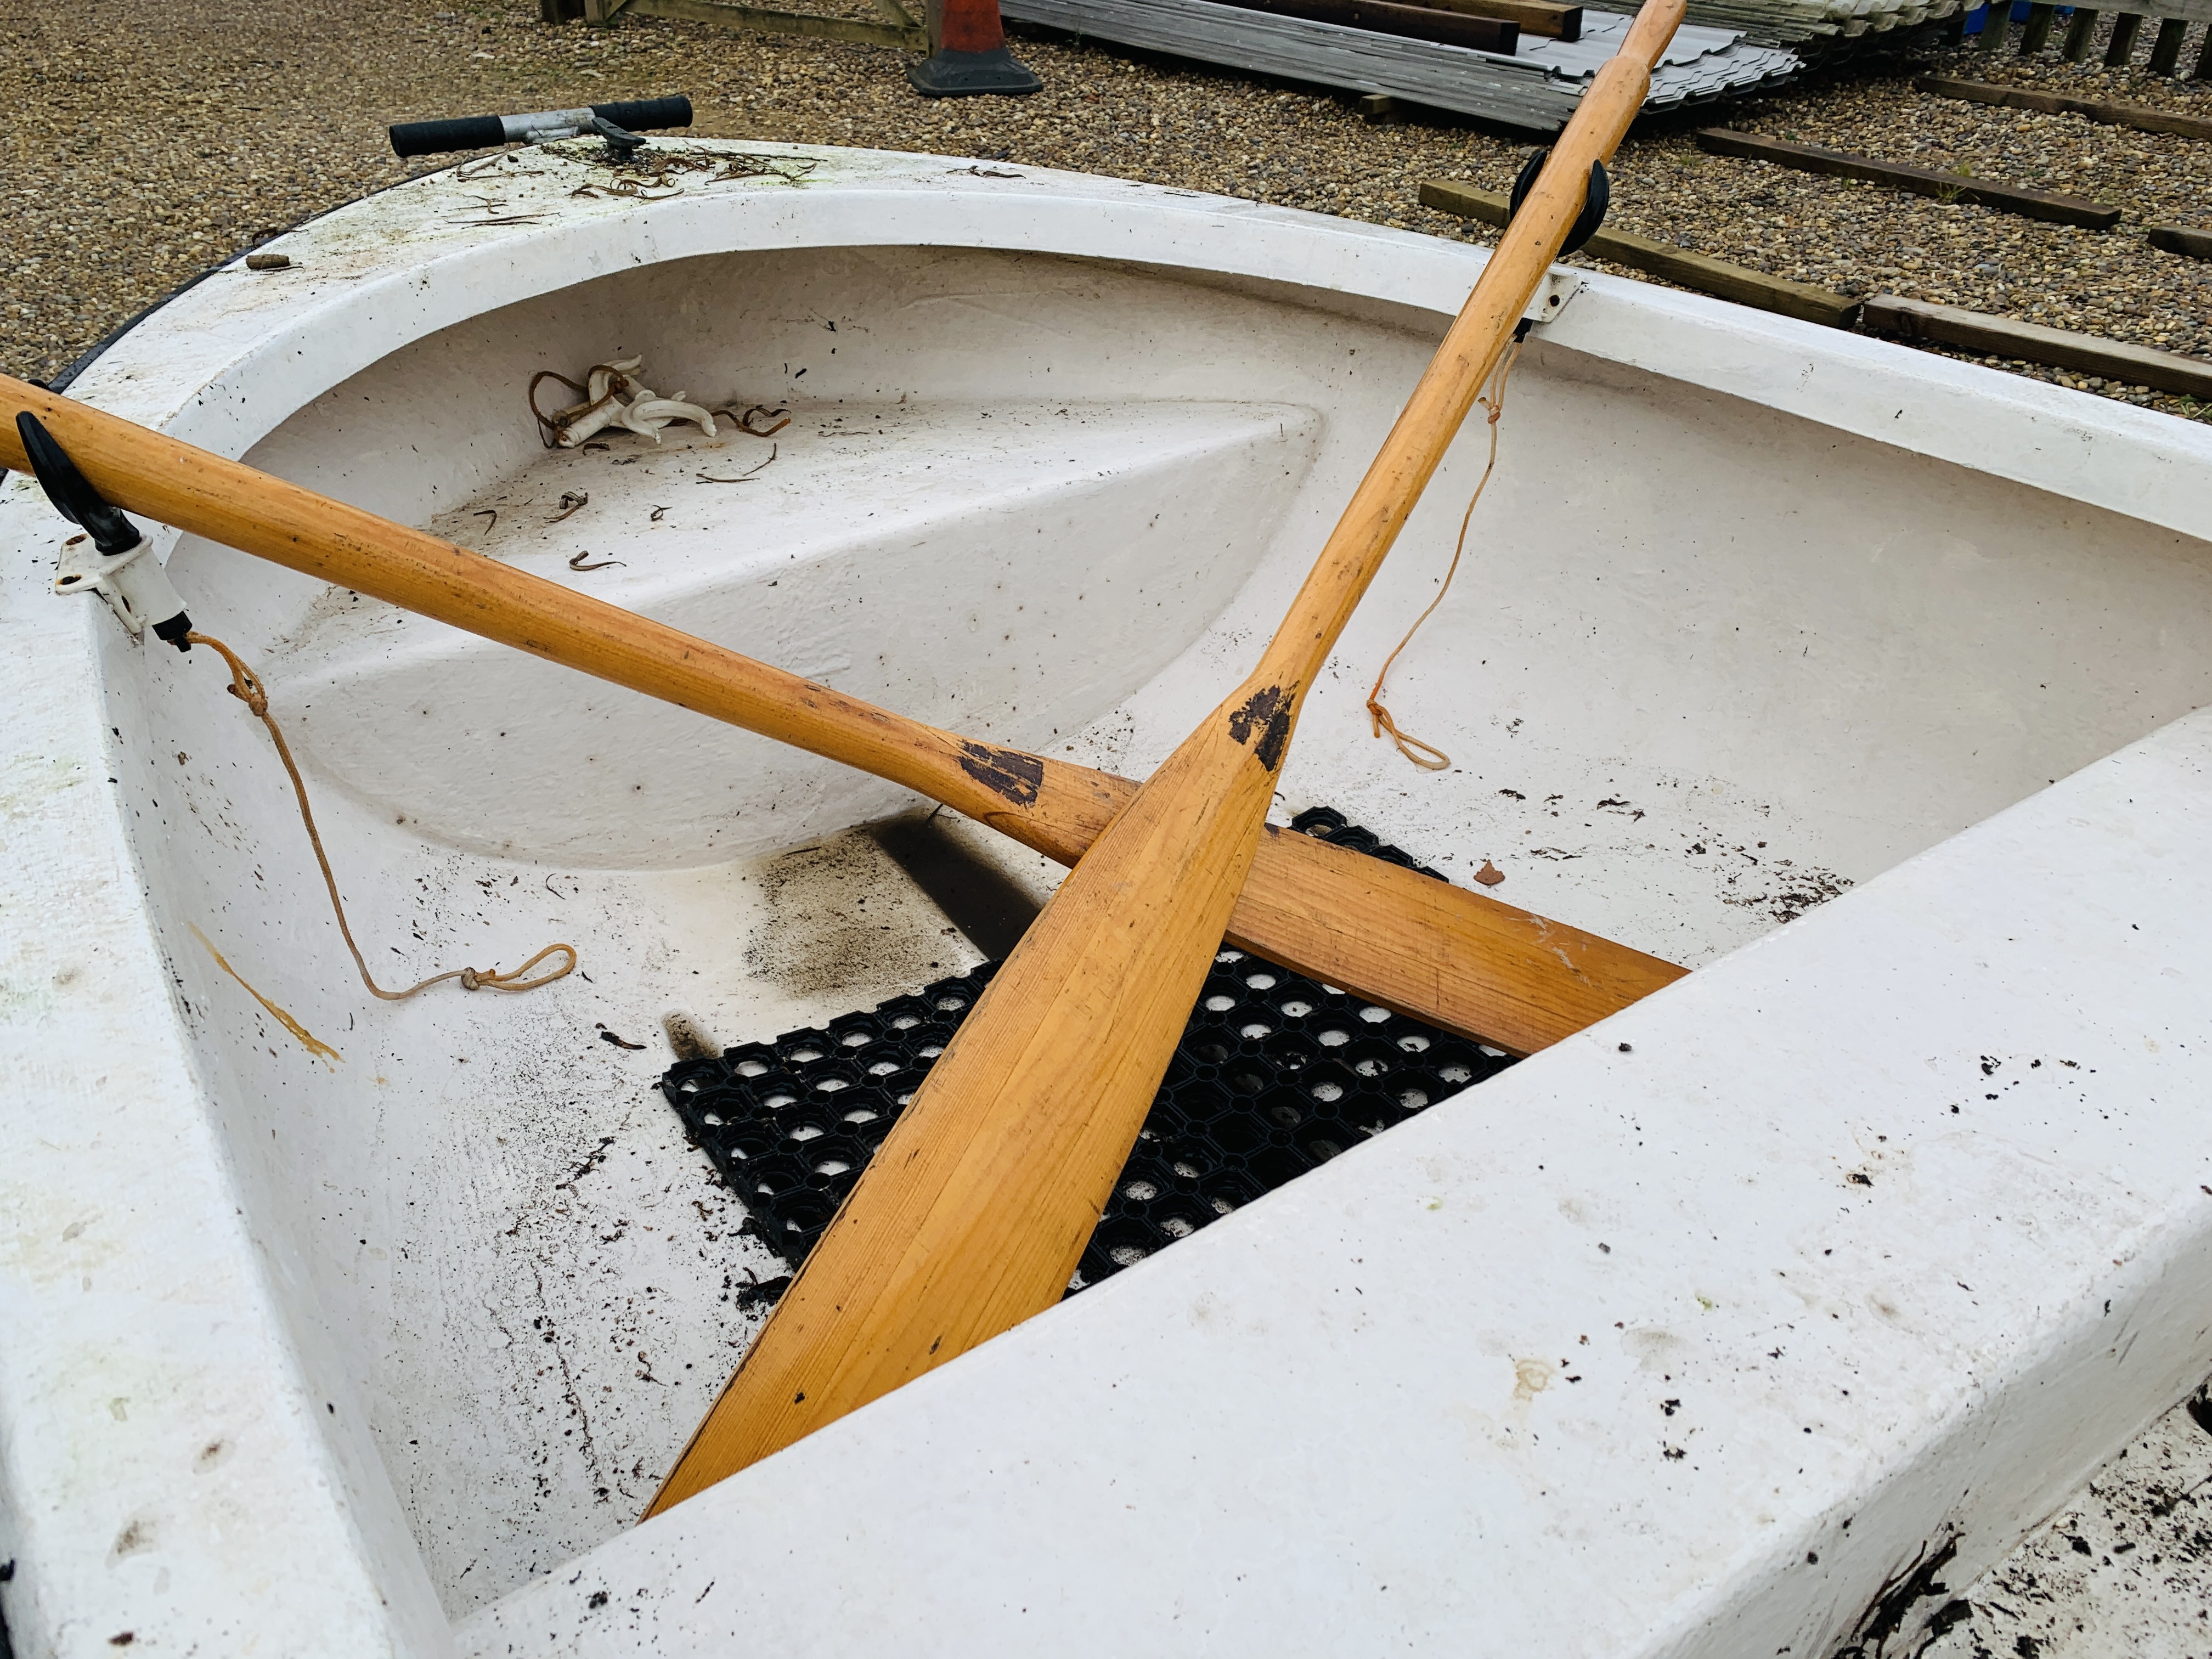 A 10FT FIBREGLASS ROWING DINGHY ON LAUNCHING TRAILER WITH OARS, - Image 10 of 12